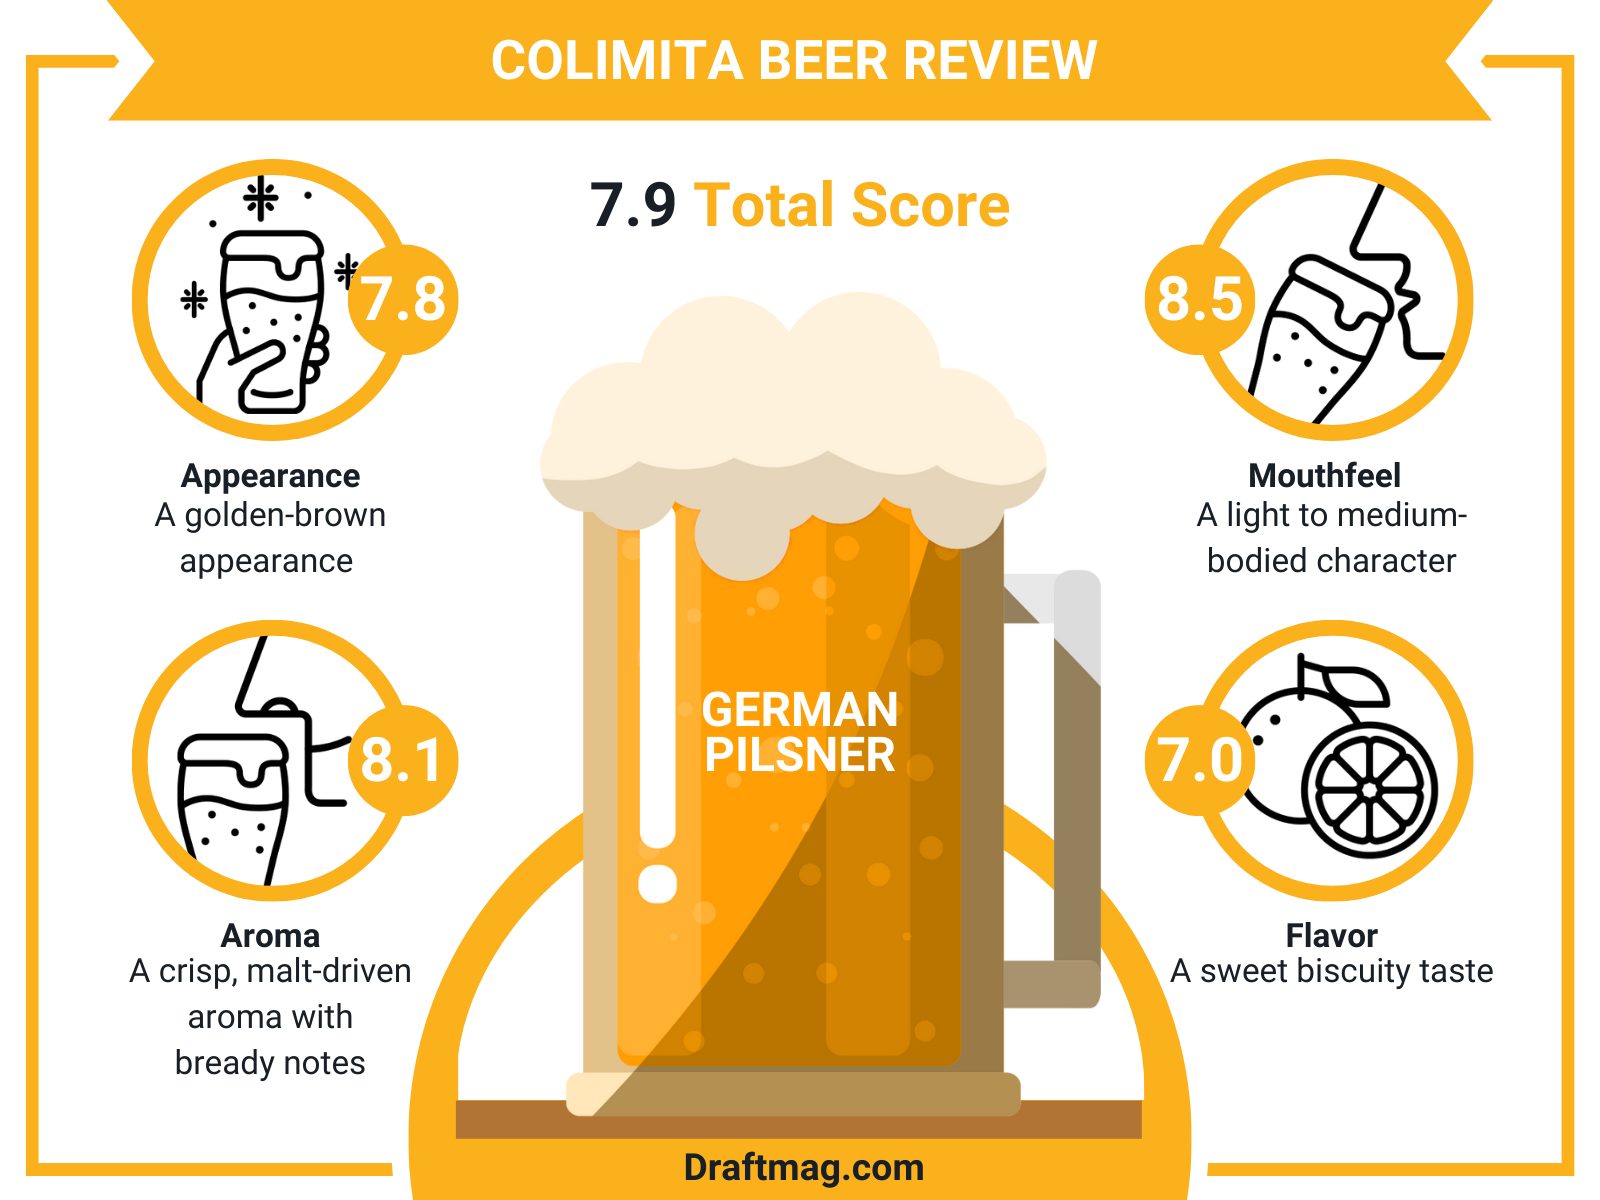 Colimita Beer Review Infographic